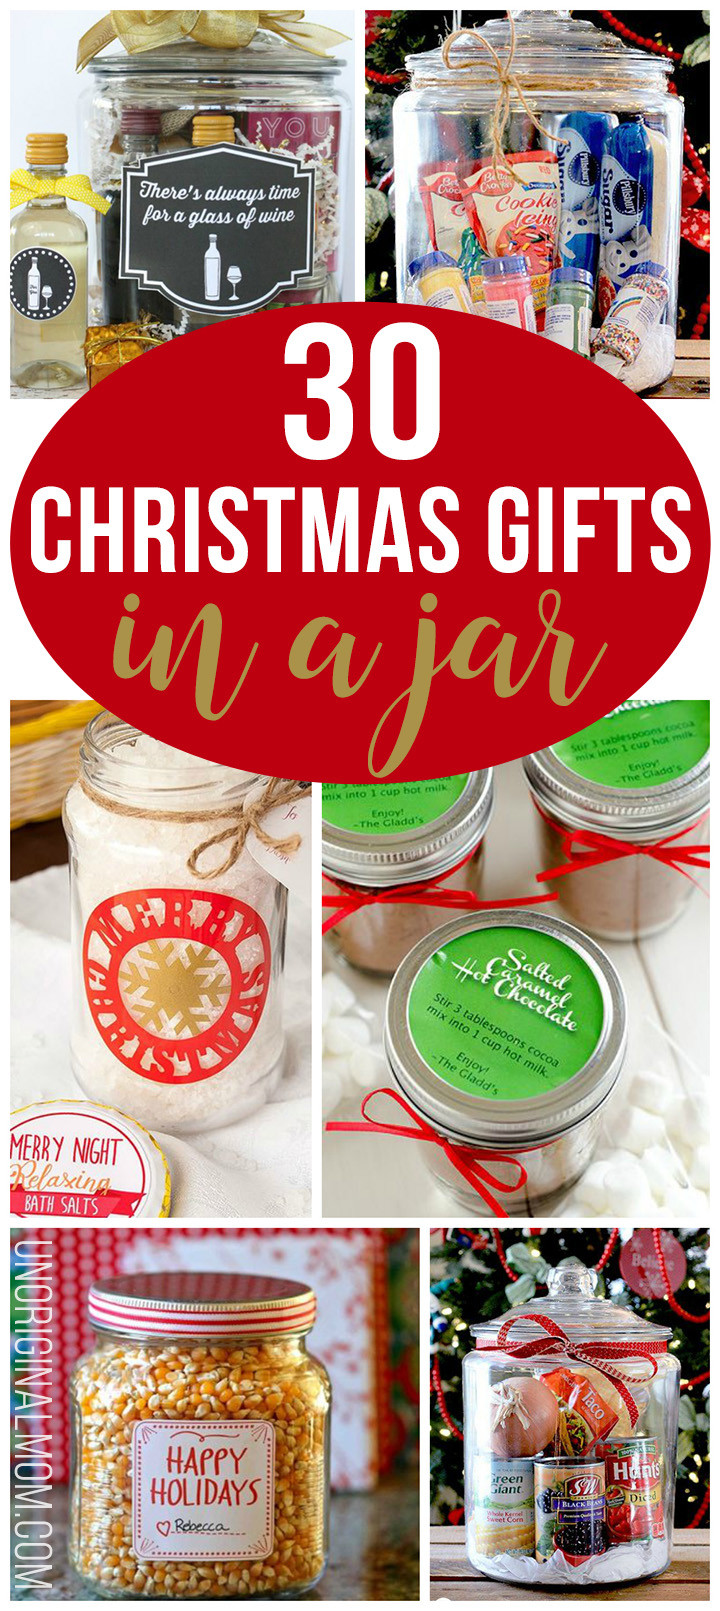 Good Holiday Gift Ideas
 30 Christmas Gifts in a Jar unOriginal Mom